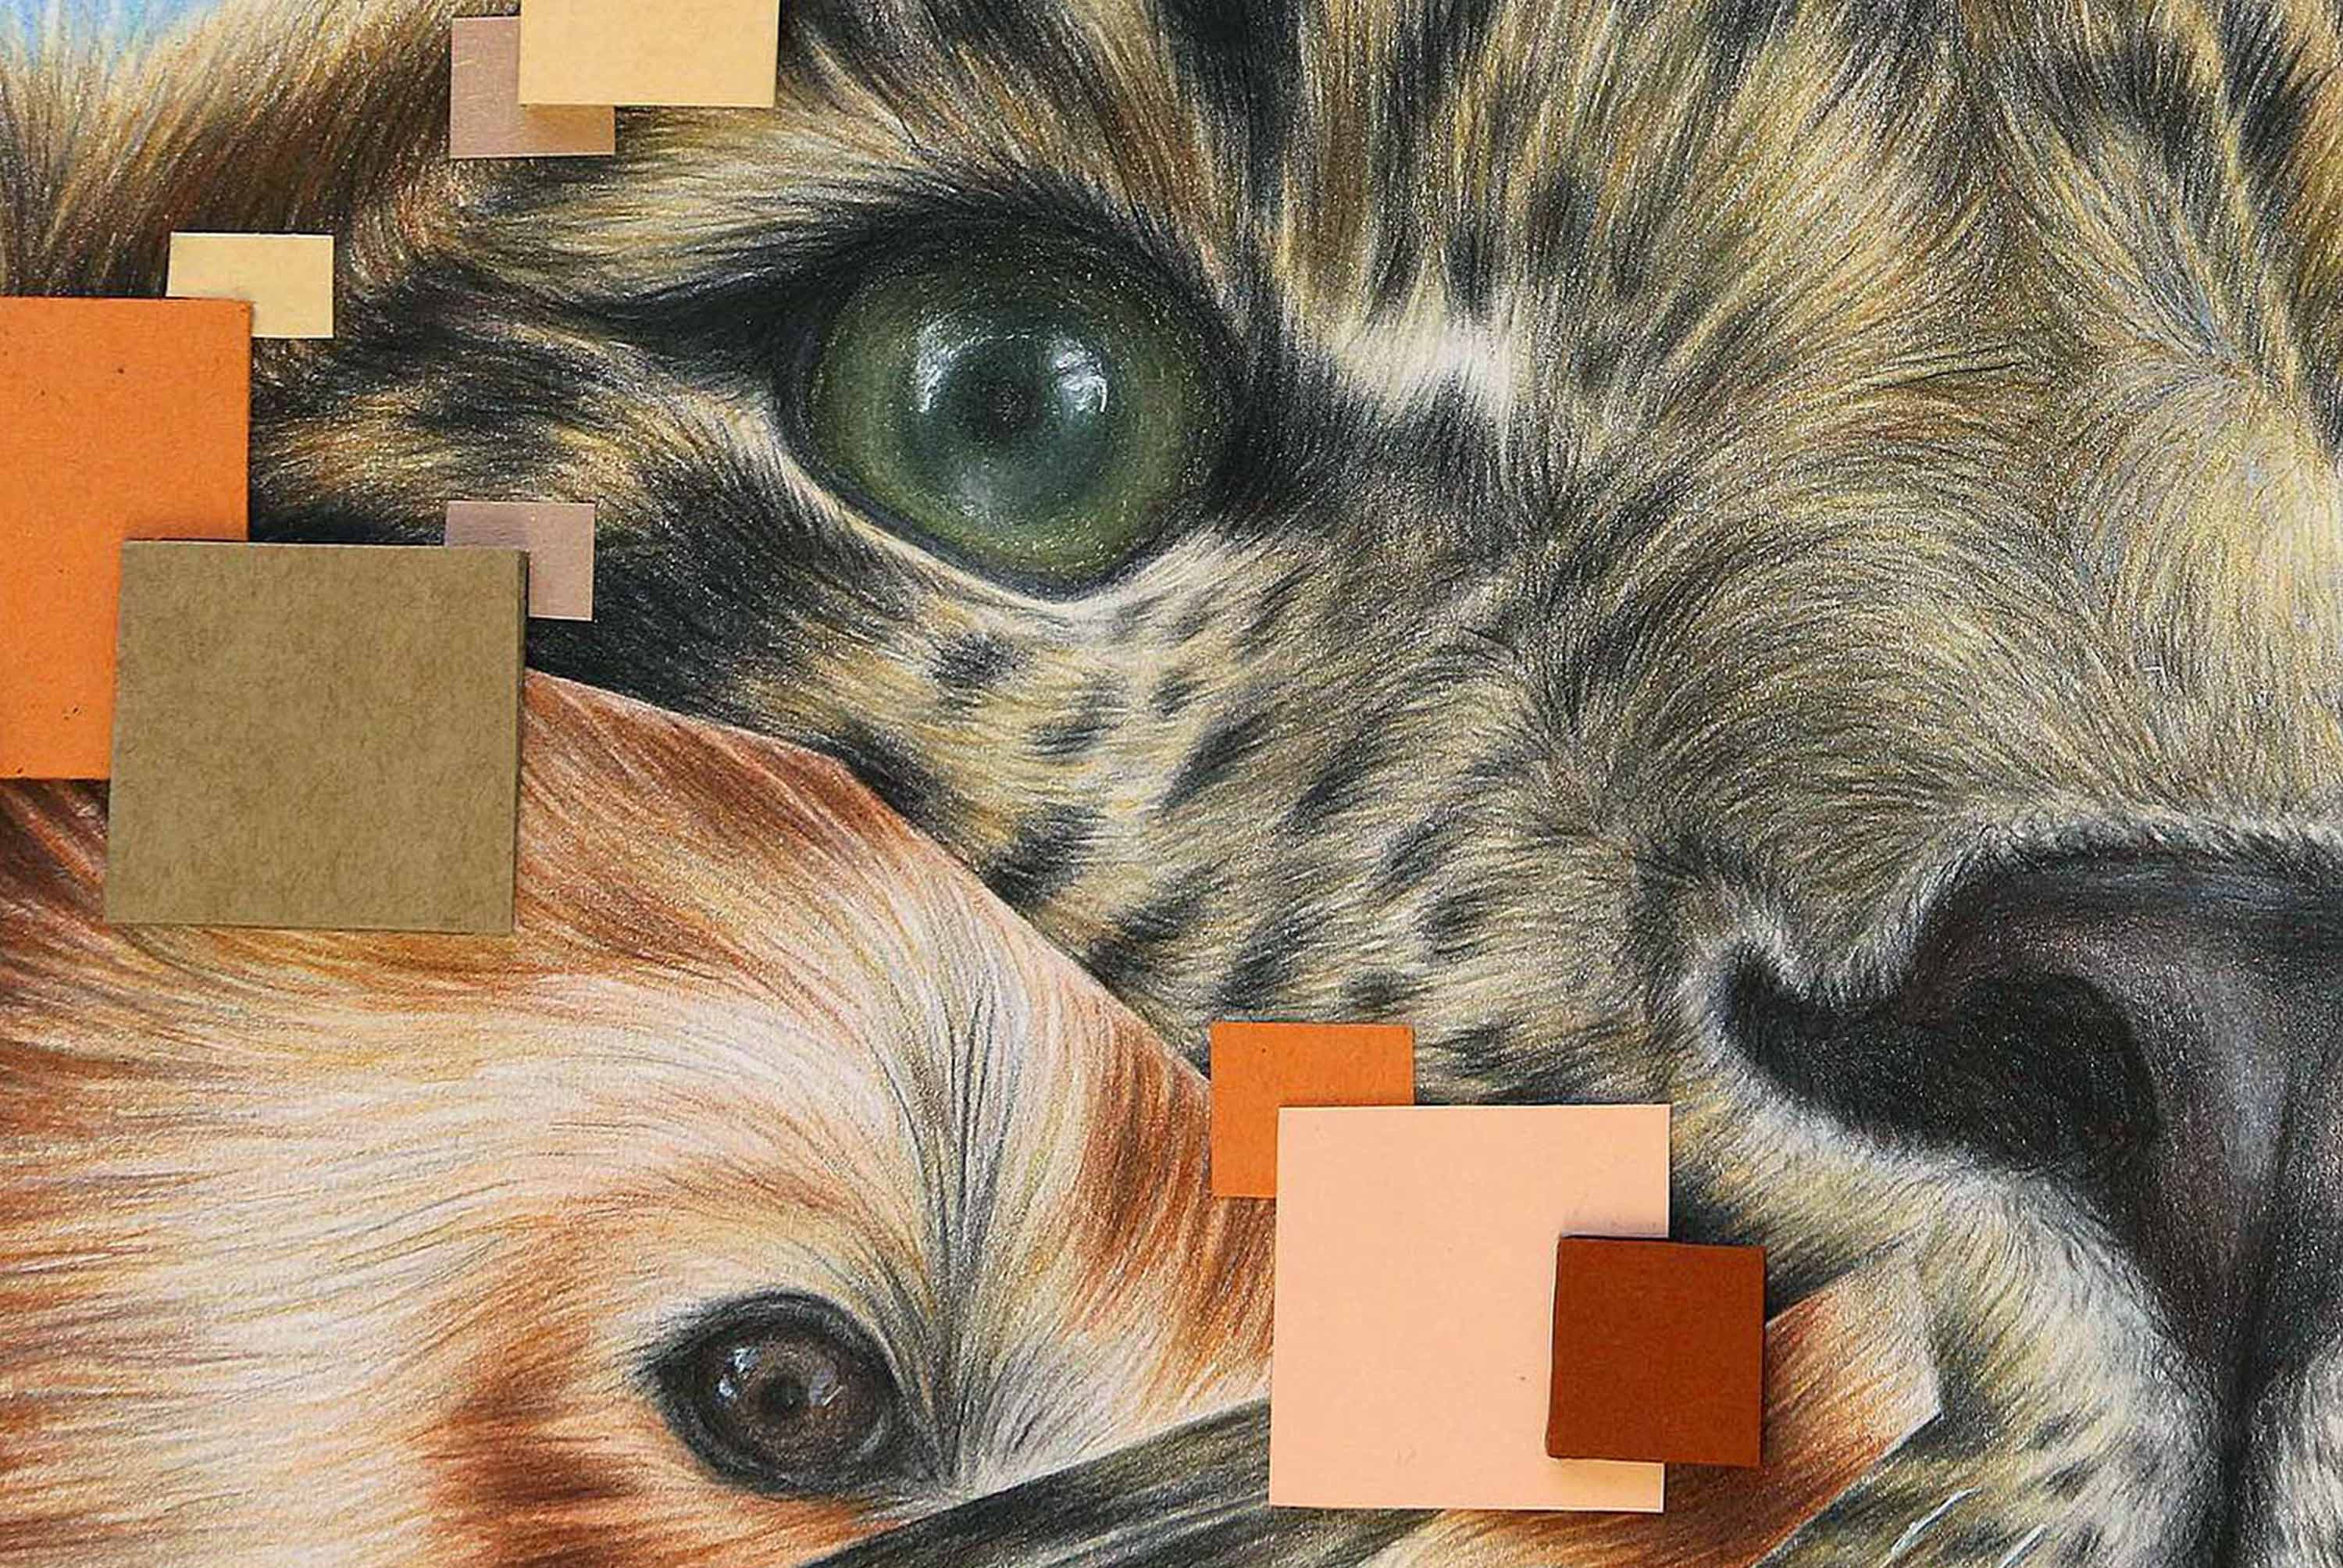 closeup of leopard eyes, nose and whisker details with red panda eye collaged into left side of face